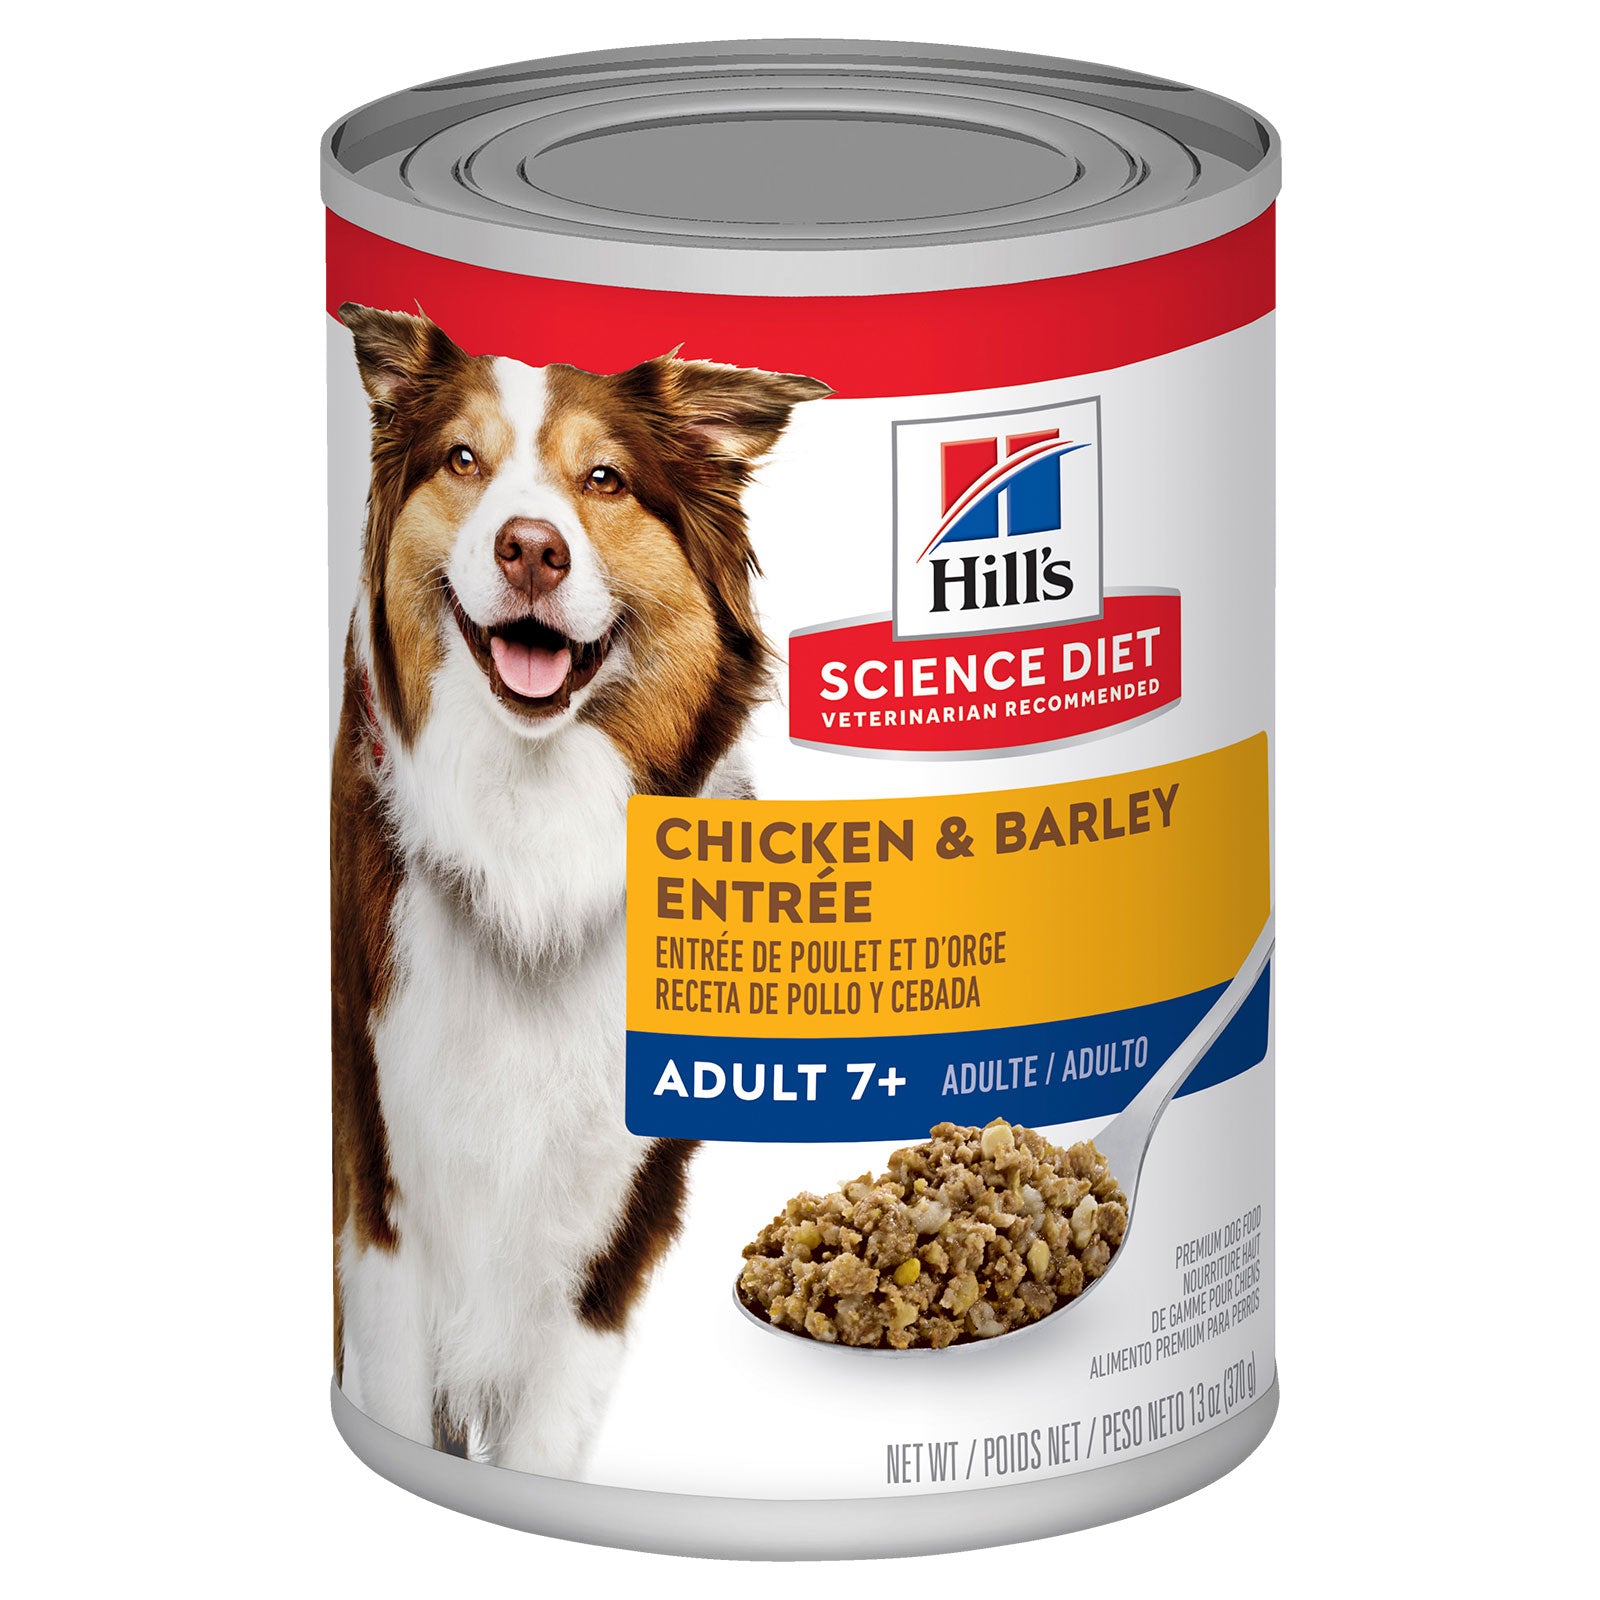 Hill's Science Diet Dog Food Can Adult 7+ Chicken & Barley Entrée